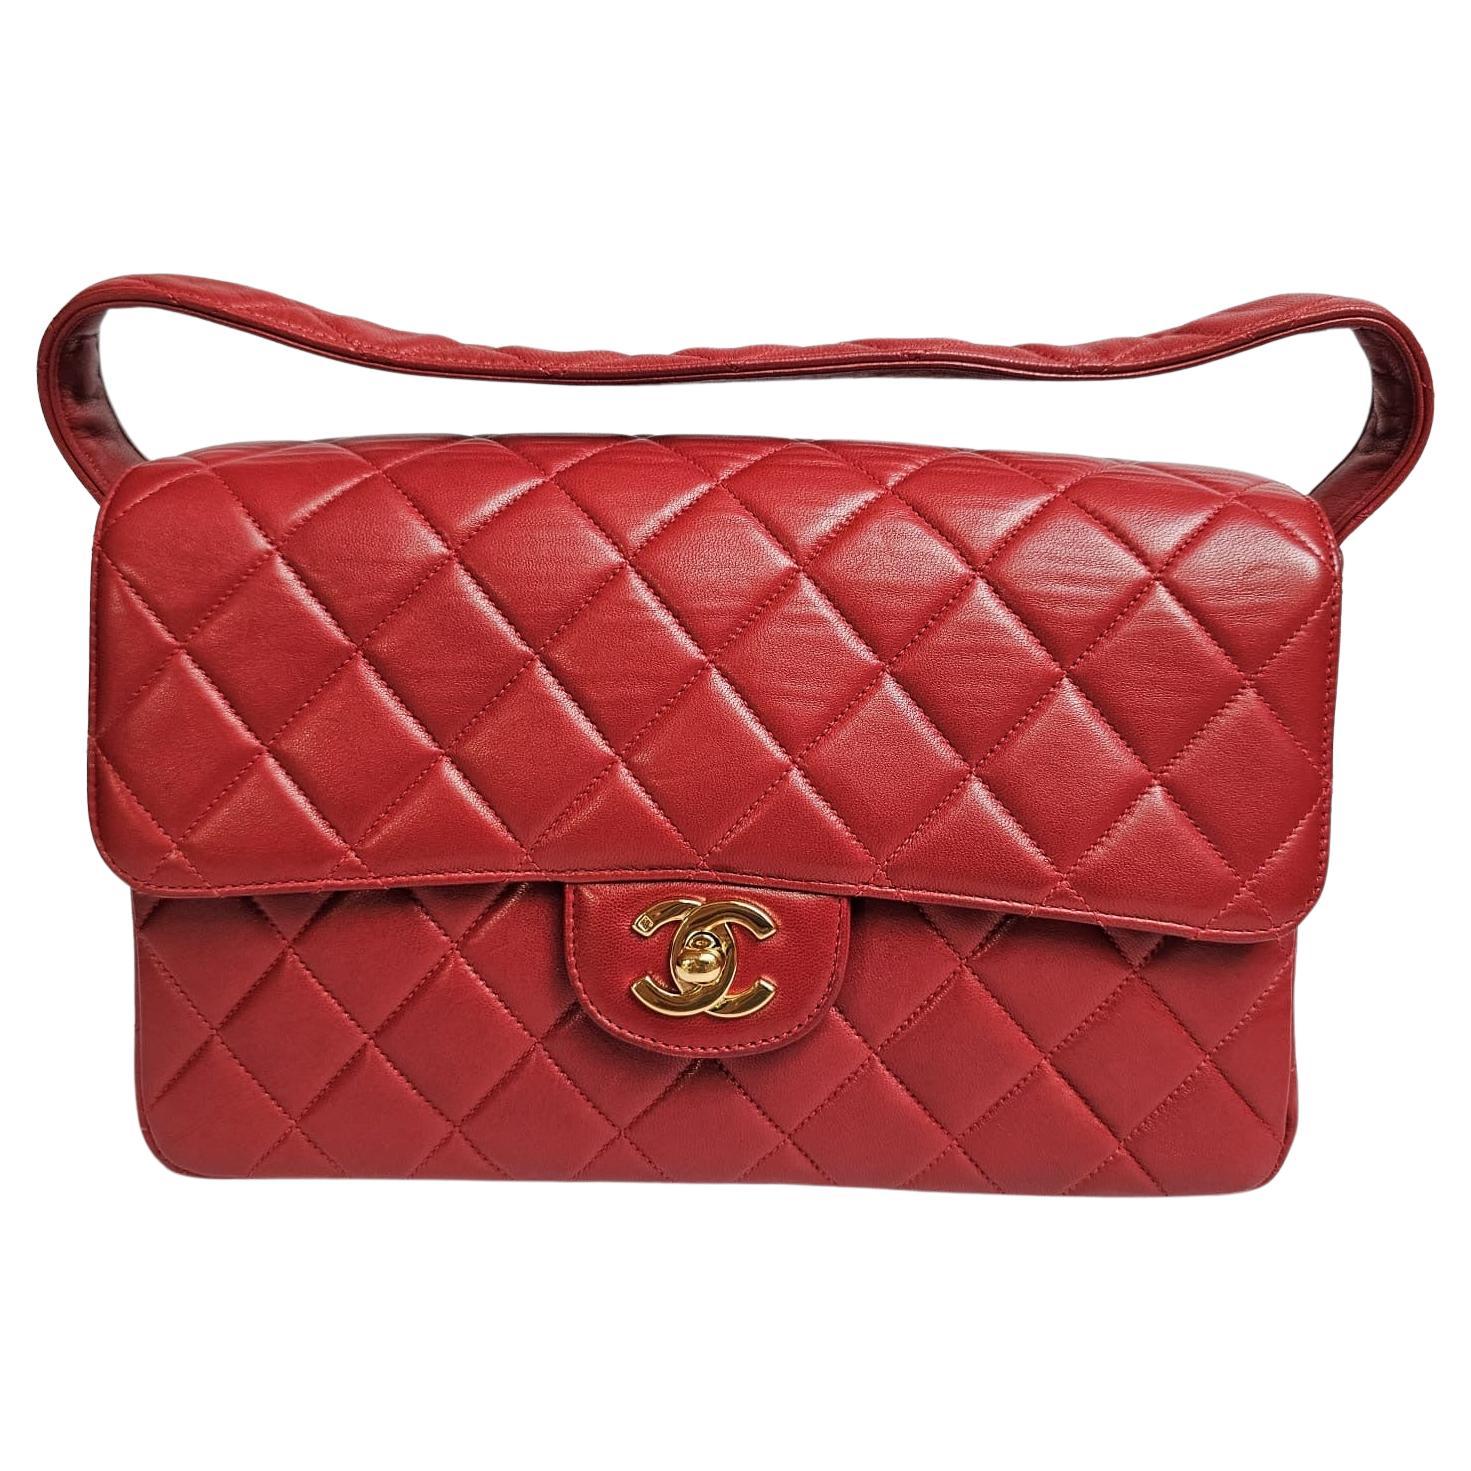 Chanel Vintage Red Lambskin Medium Quilted Double Face Top Handle Bag For Sale